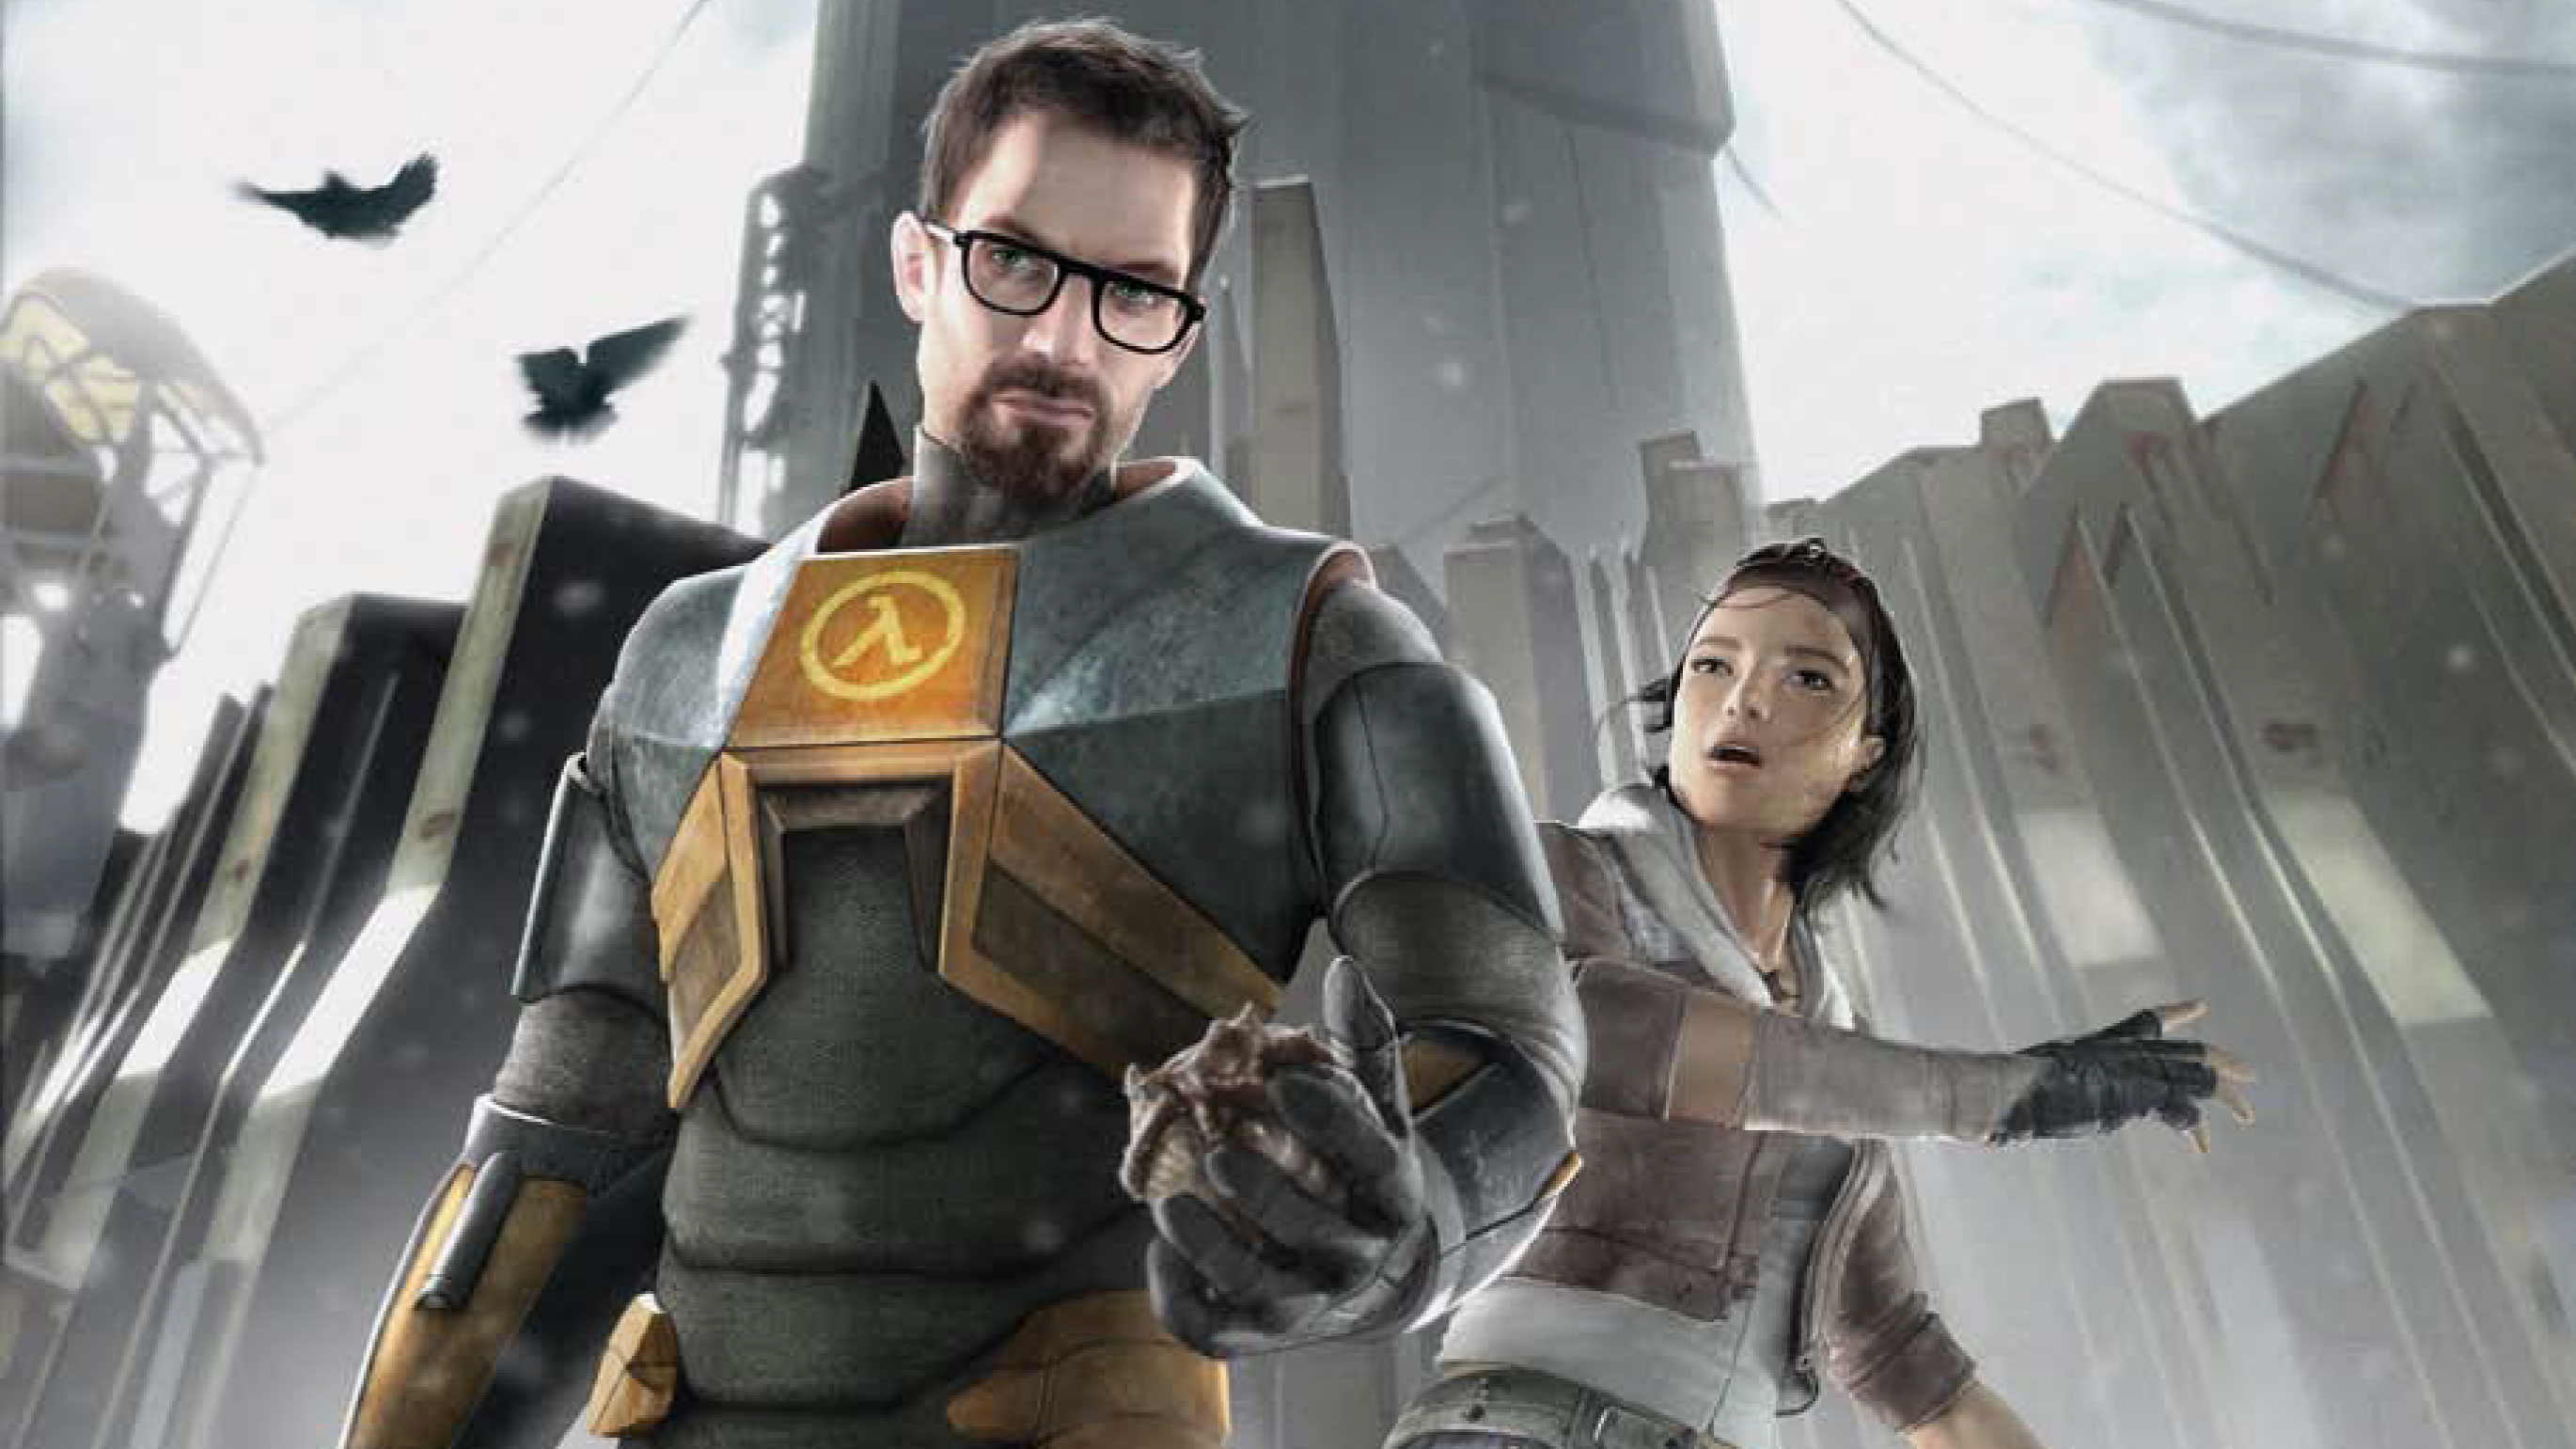 New Half-Life sequel to be VR exclusive, Games